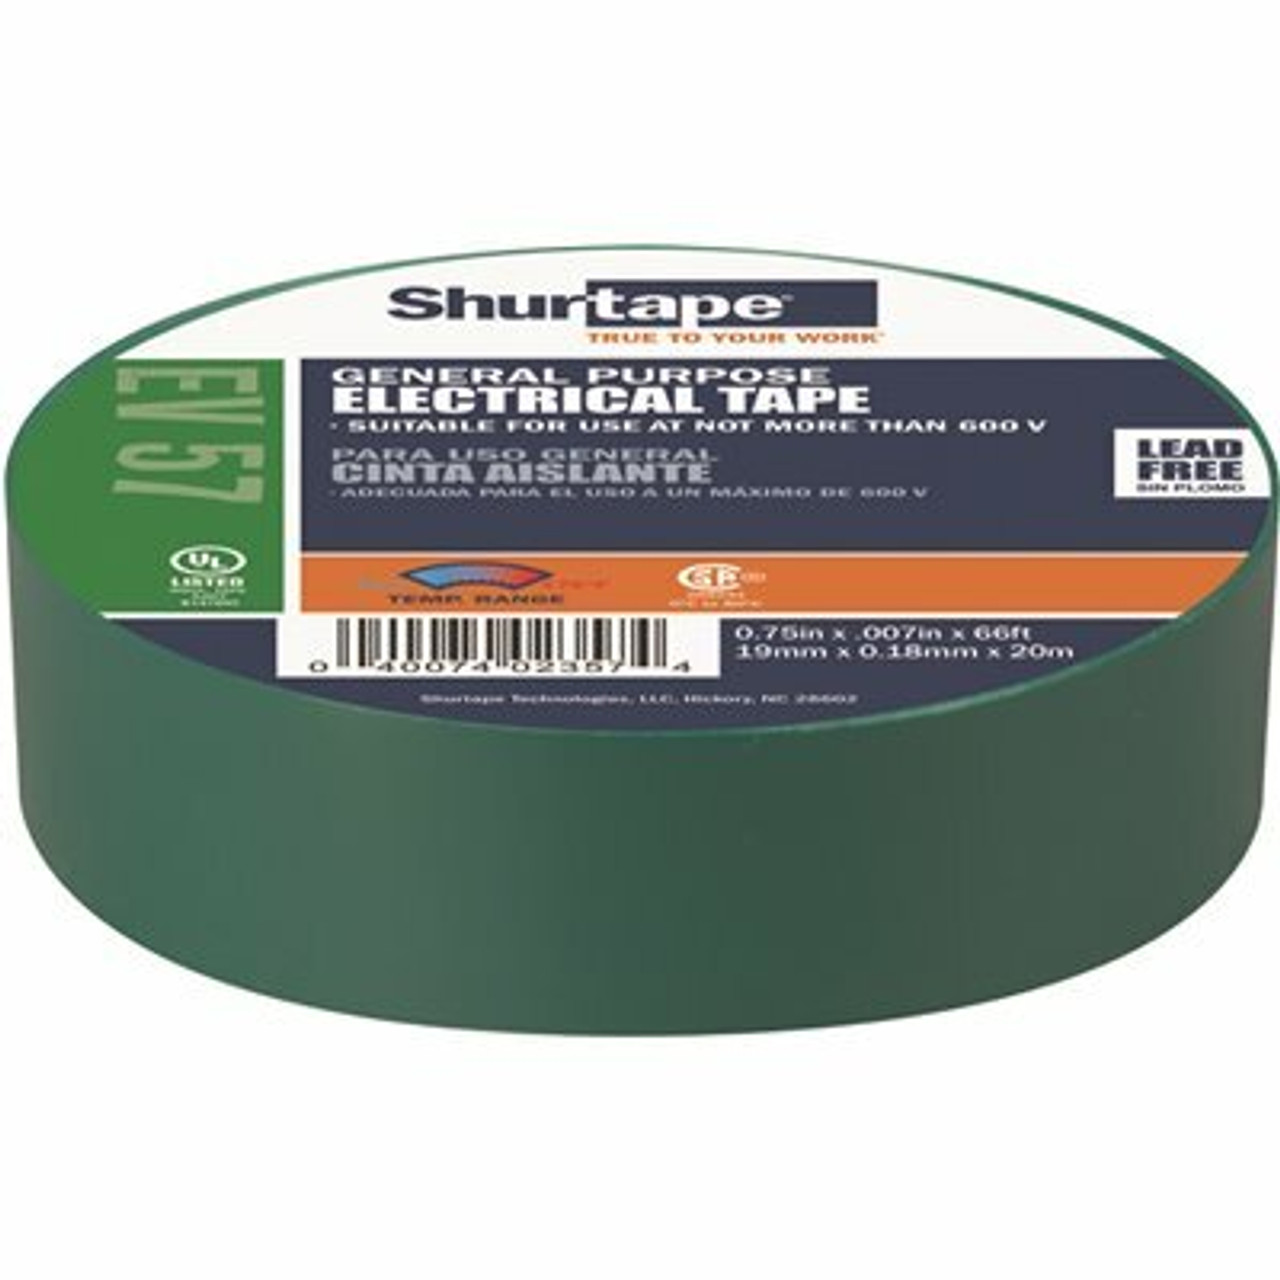 Shurtape Ev 57 3/4 In. X 66 Ft. General Purpose Electrical Tape, Ul Listed, Green, 7 Mils (1 Roll)